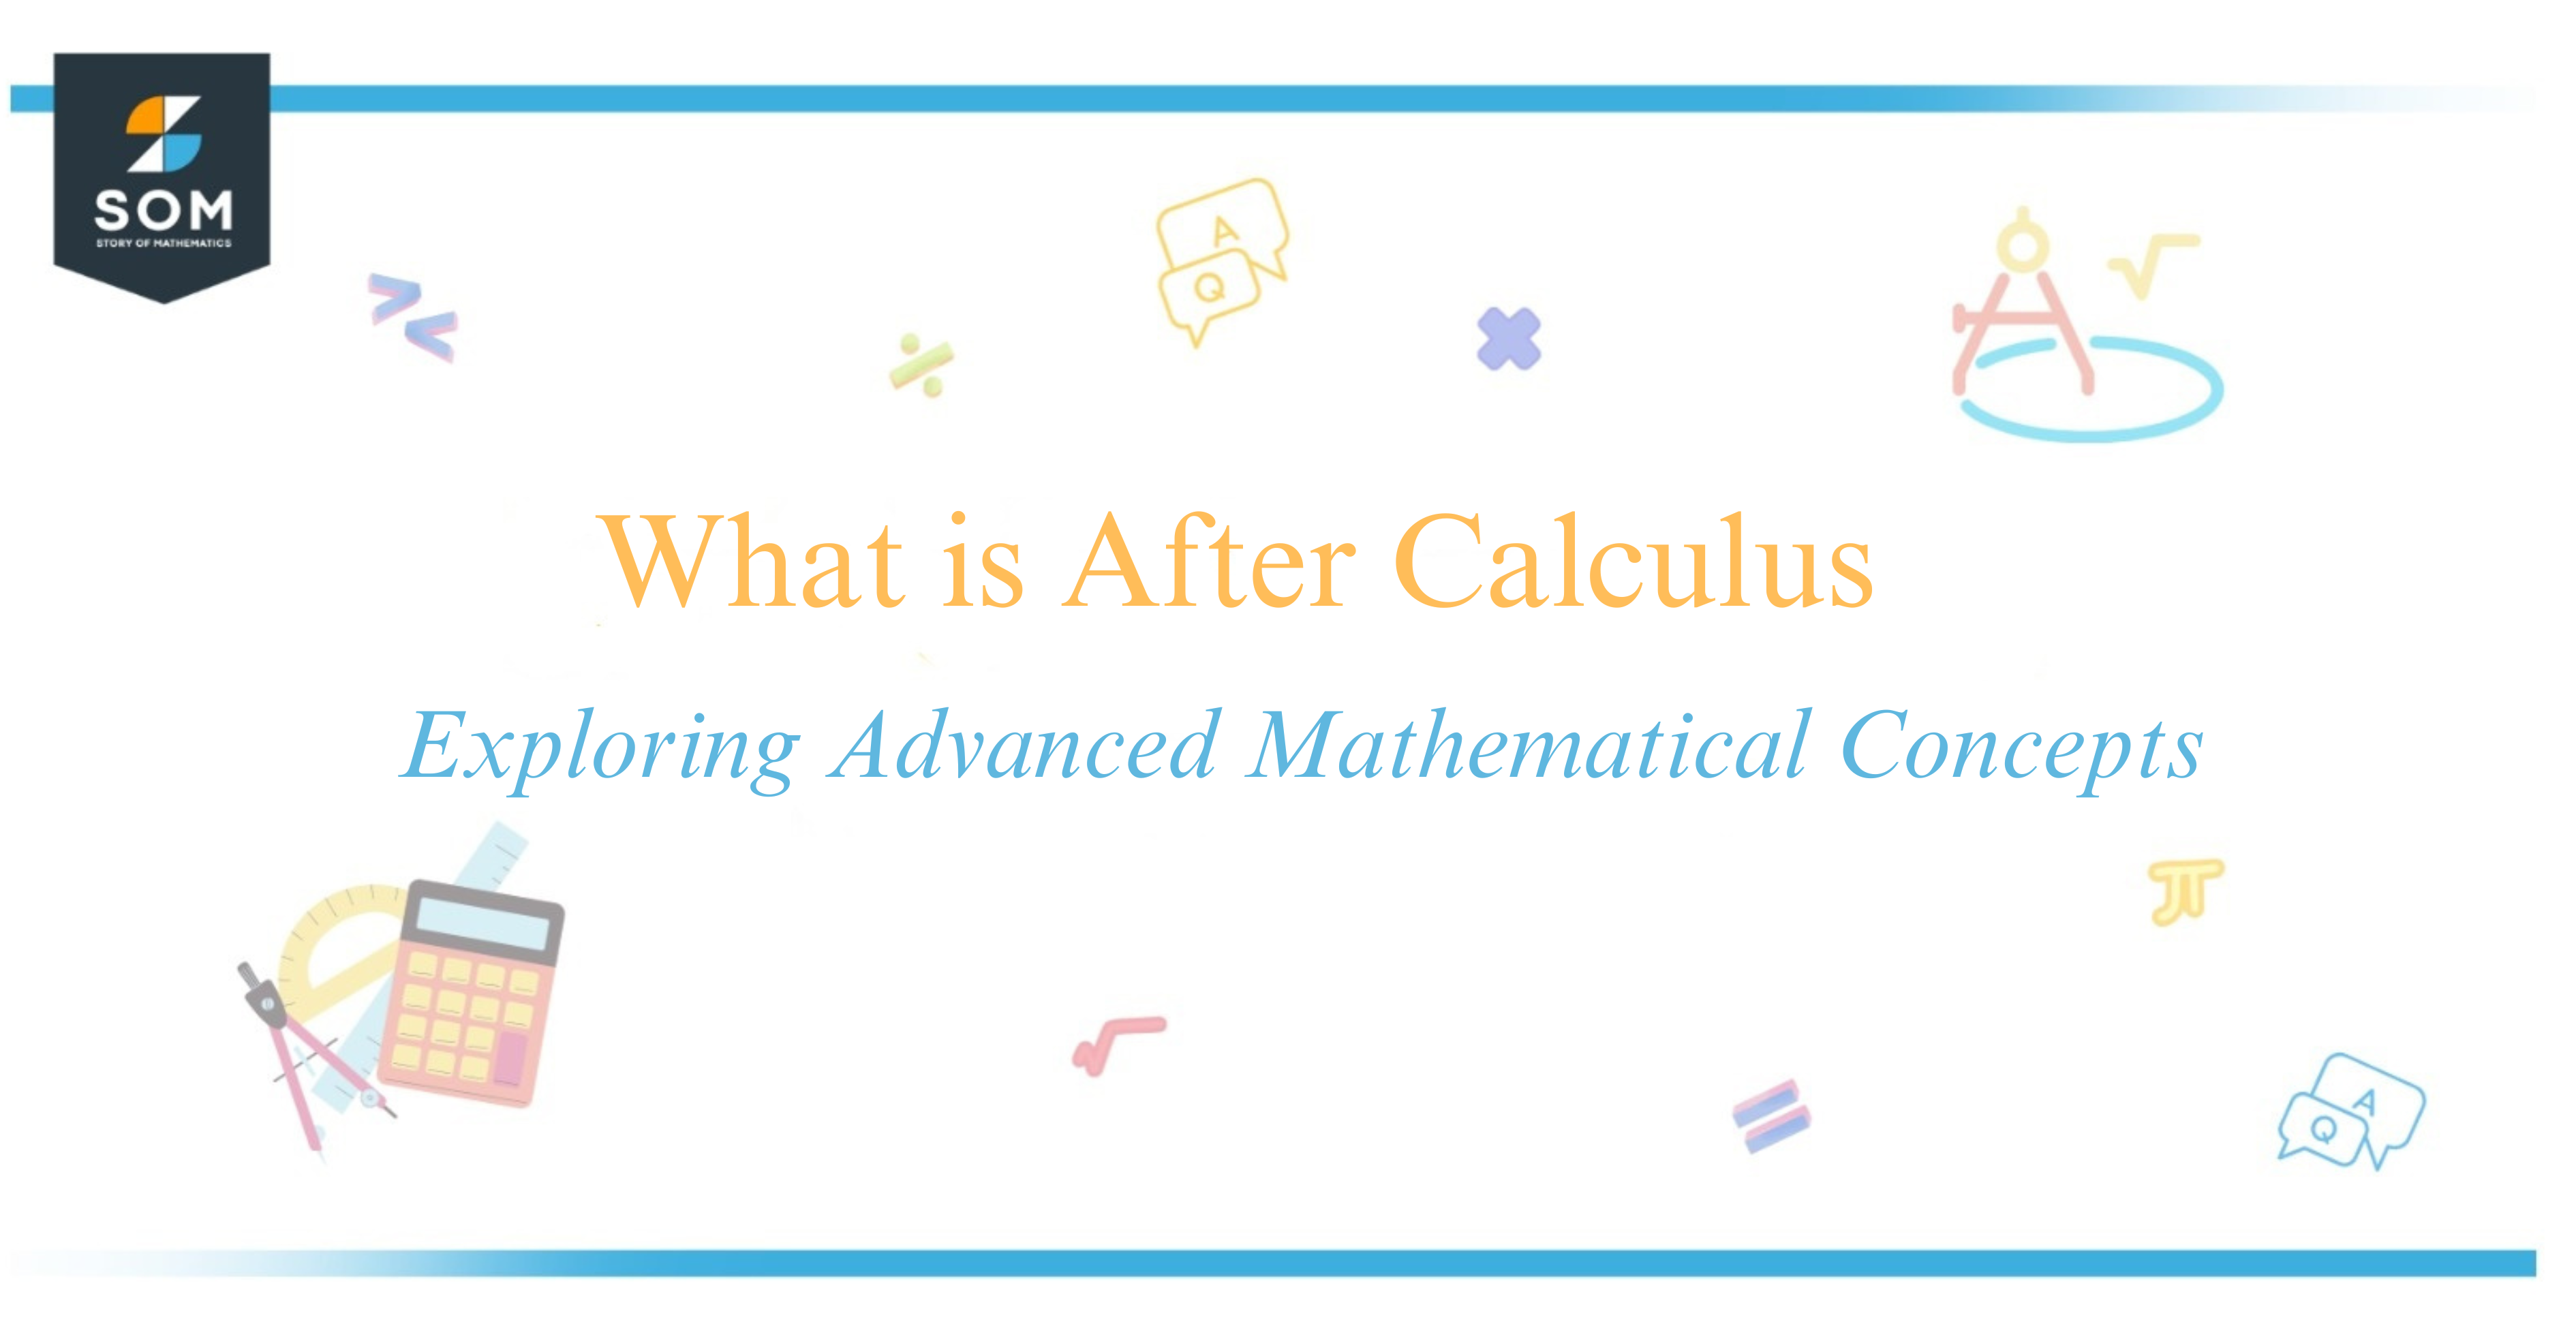 What is After Calculus Exploring Advanced Mathematical Concepts